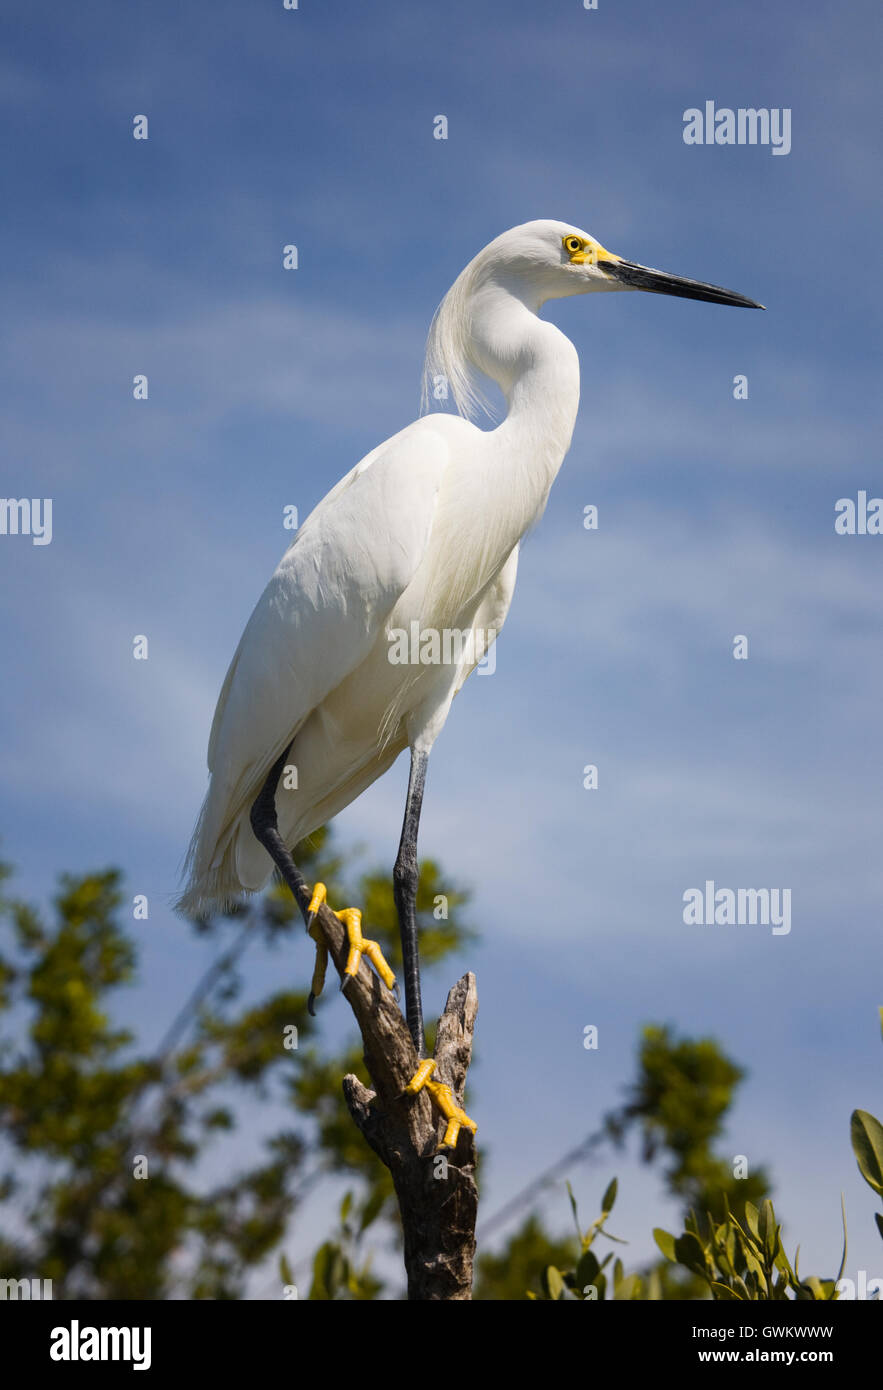 A Snowy Egret with its white feathers, long shaggy head plumes, yellow lore and feet looks amazing against a blue Florida sky. Stock Photo